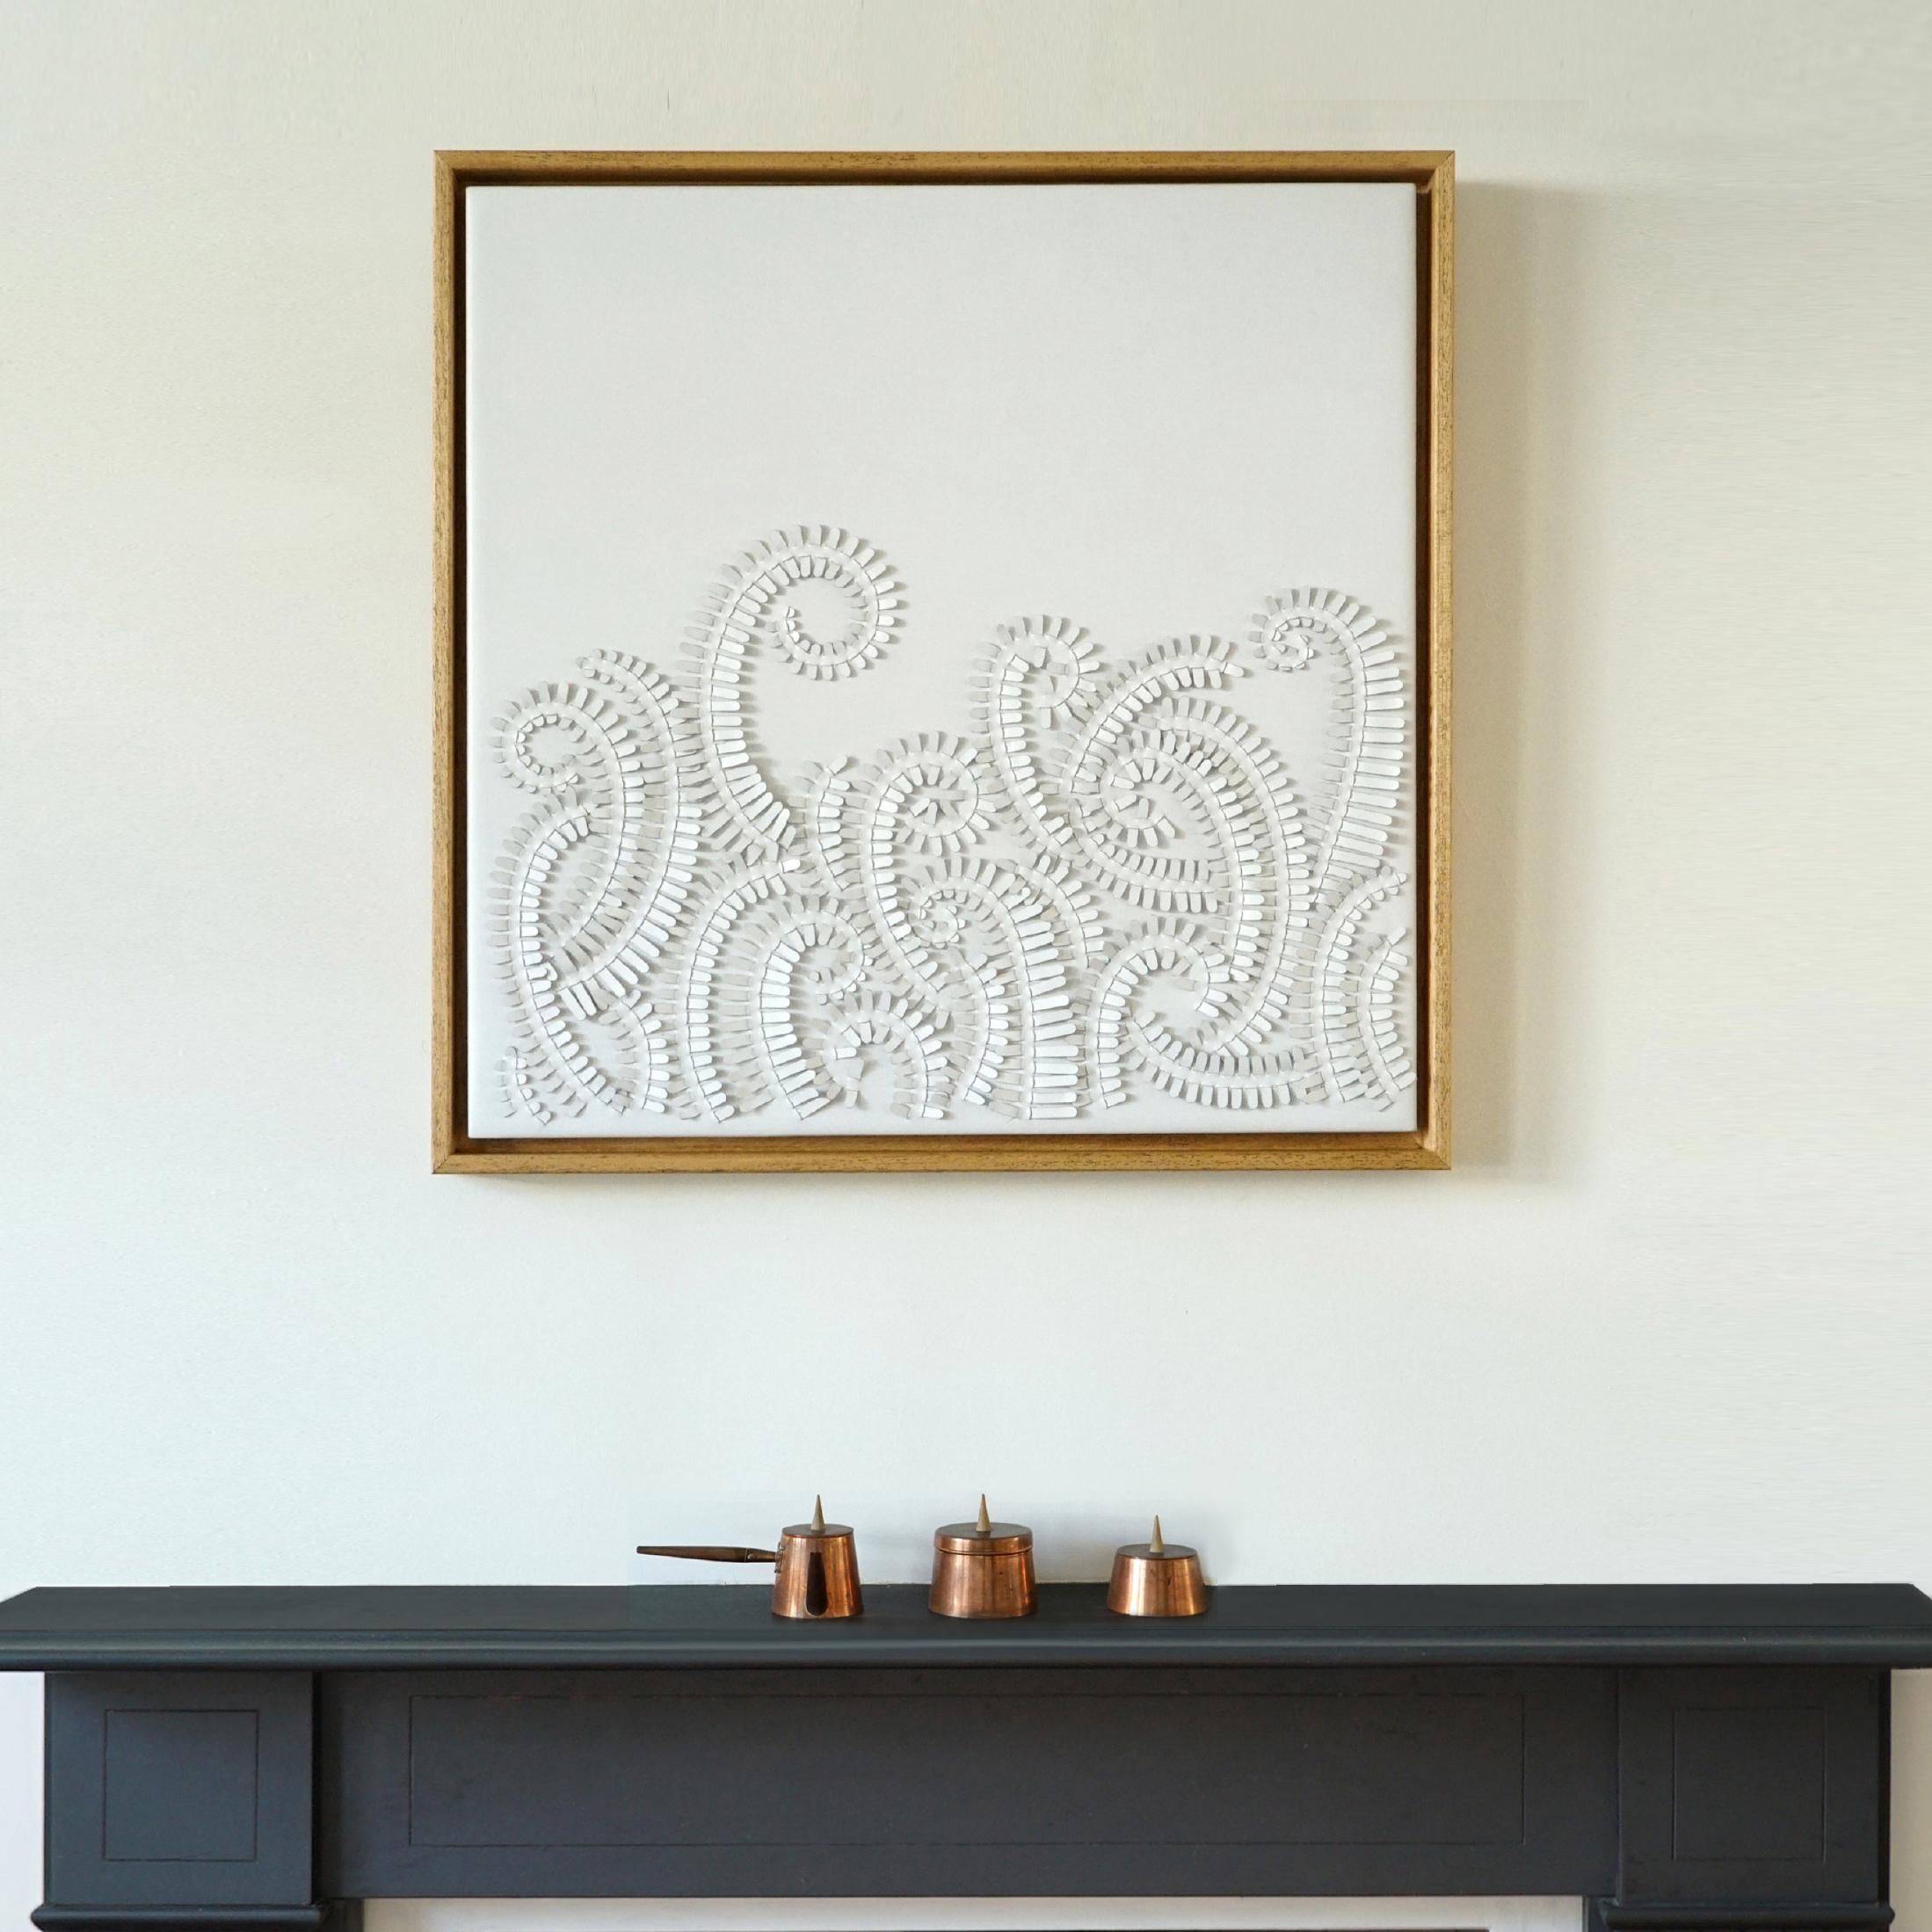 Fern:

A piece of 3D sculptural wall art designed and made from two layers of white leather, woven together by Louise Heighes.
Measurements are 25.5 x 25.5 inches or 65 x 65 cm

This piece of wall art is inspired by the way the tips of the fern curl